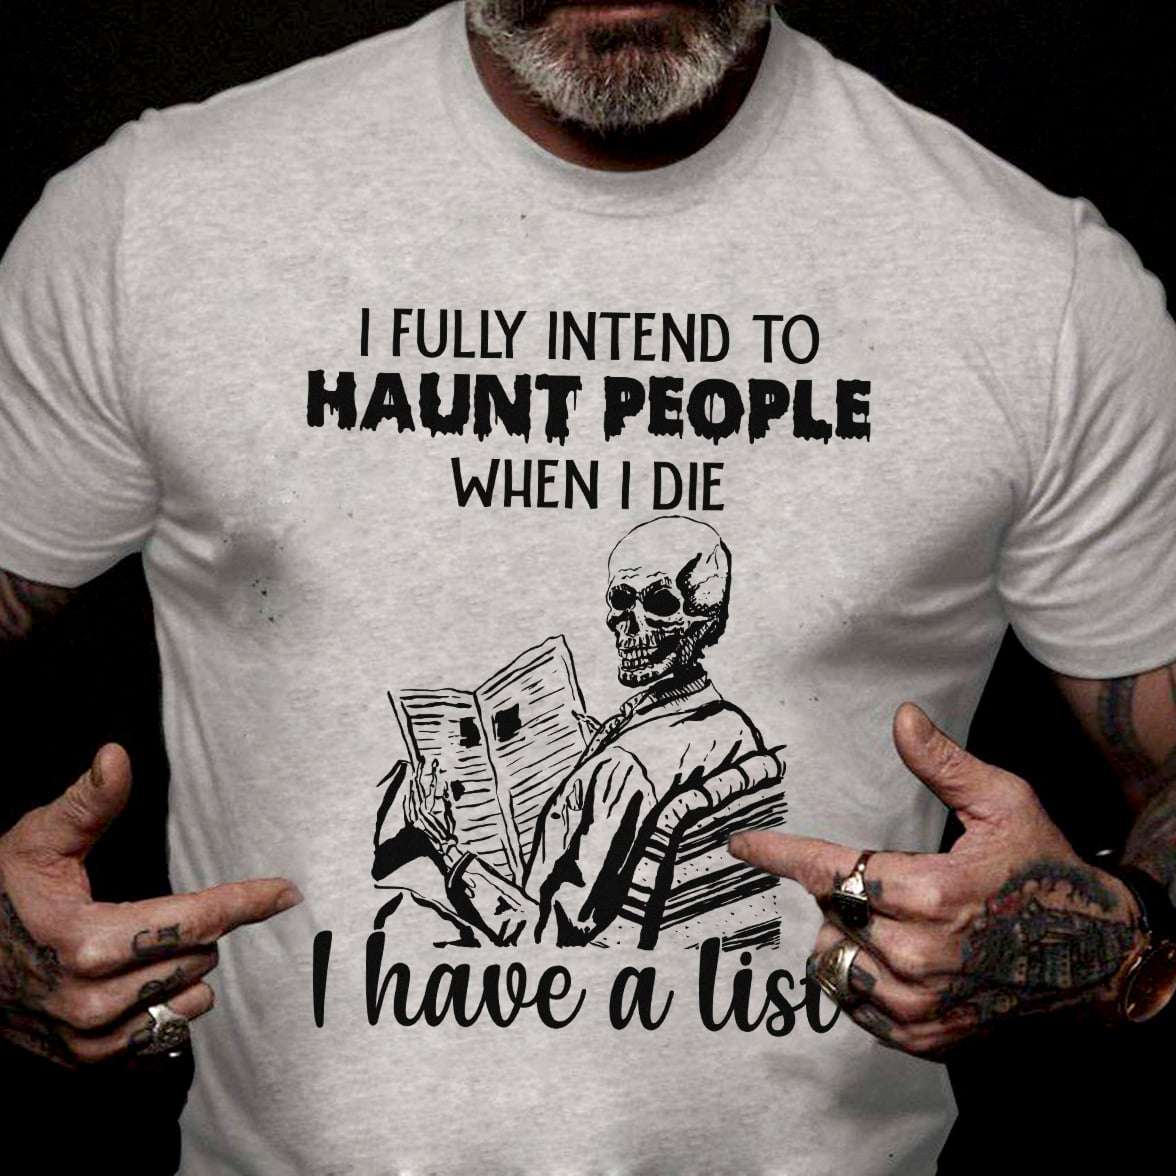 I fully intent to haunt people when I die I have a list - Halloween skull costume, Karma list